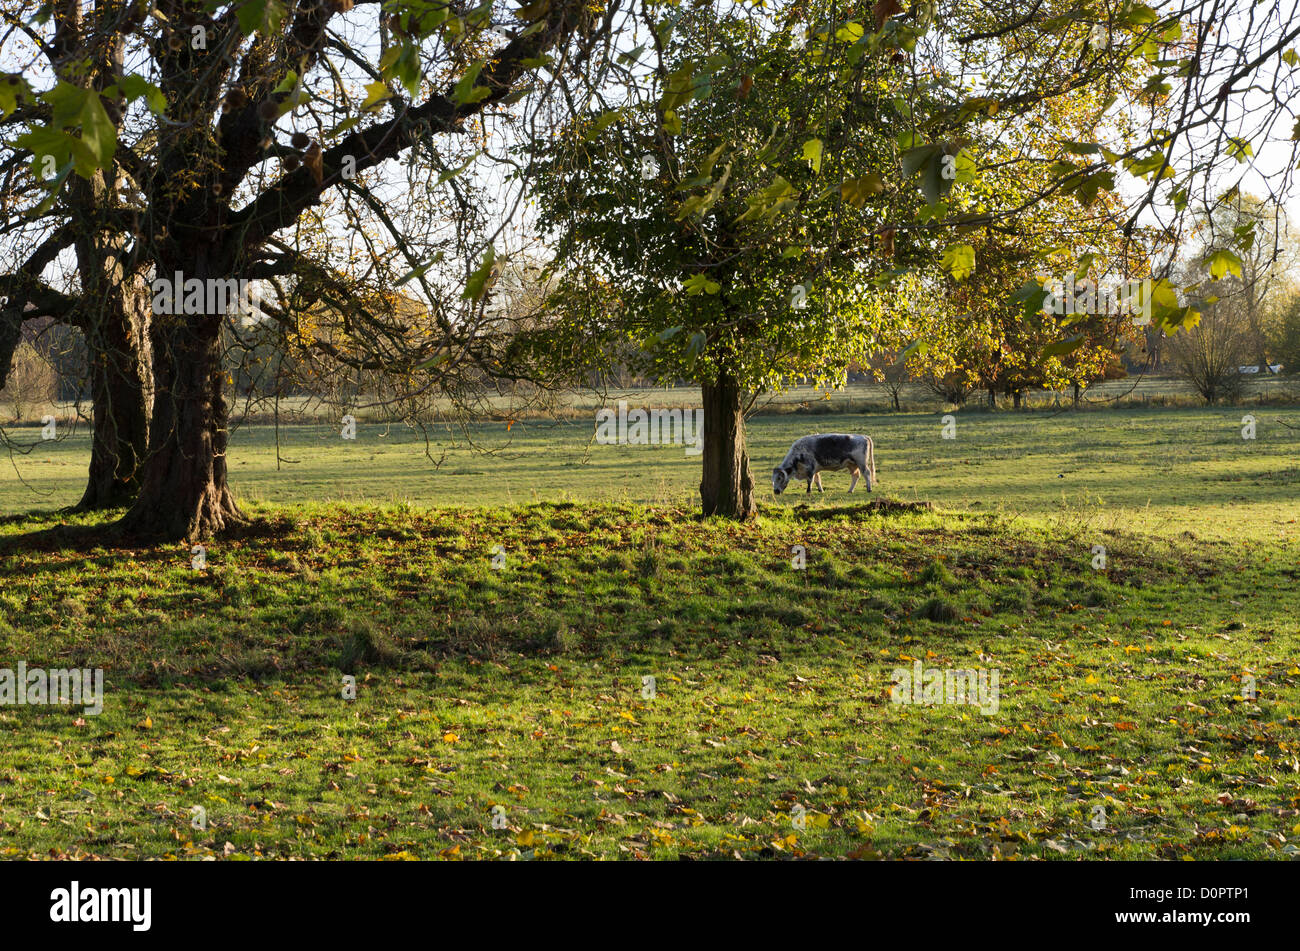 A cow on Christ Church Meadow, Oxford, UK Stock Photo